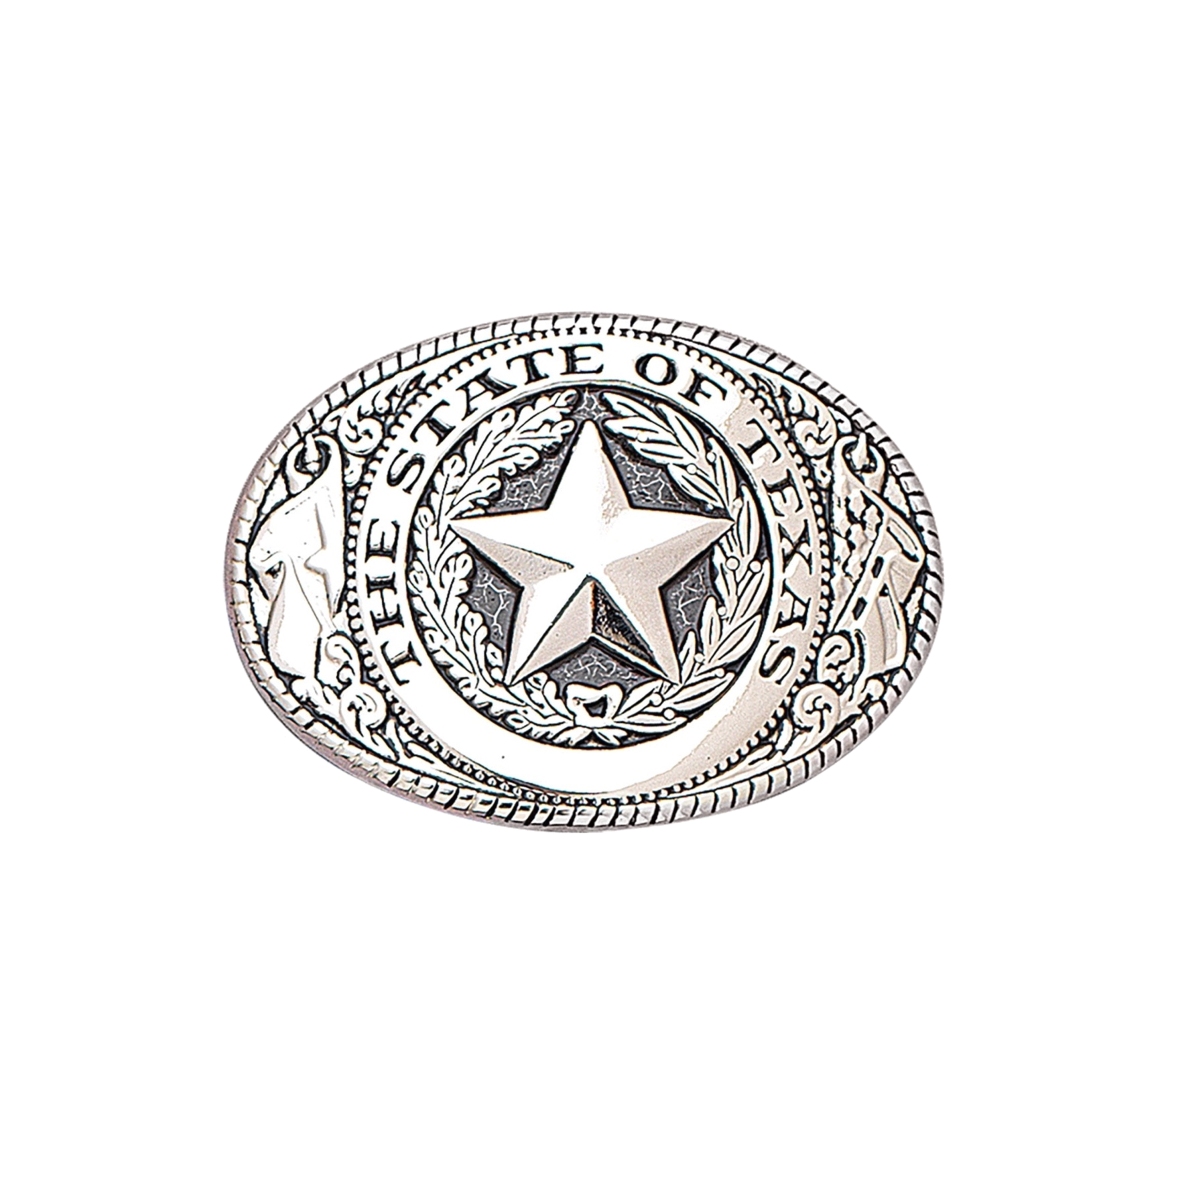 MF-37004 Belt Buckle The State of Texas Silver and Black